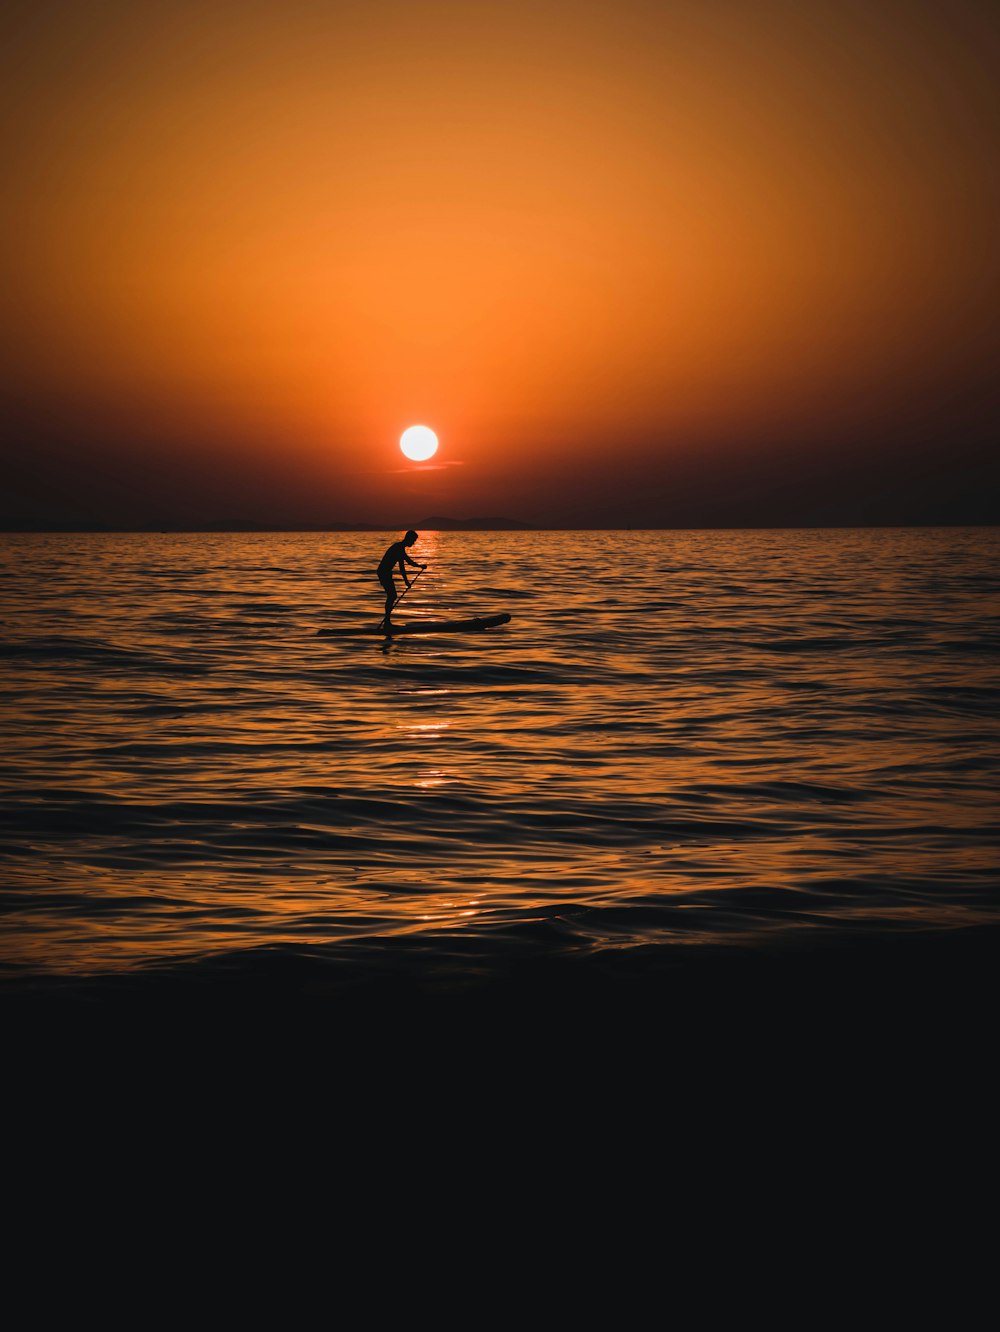 a person riding a surfboard on a body of water